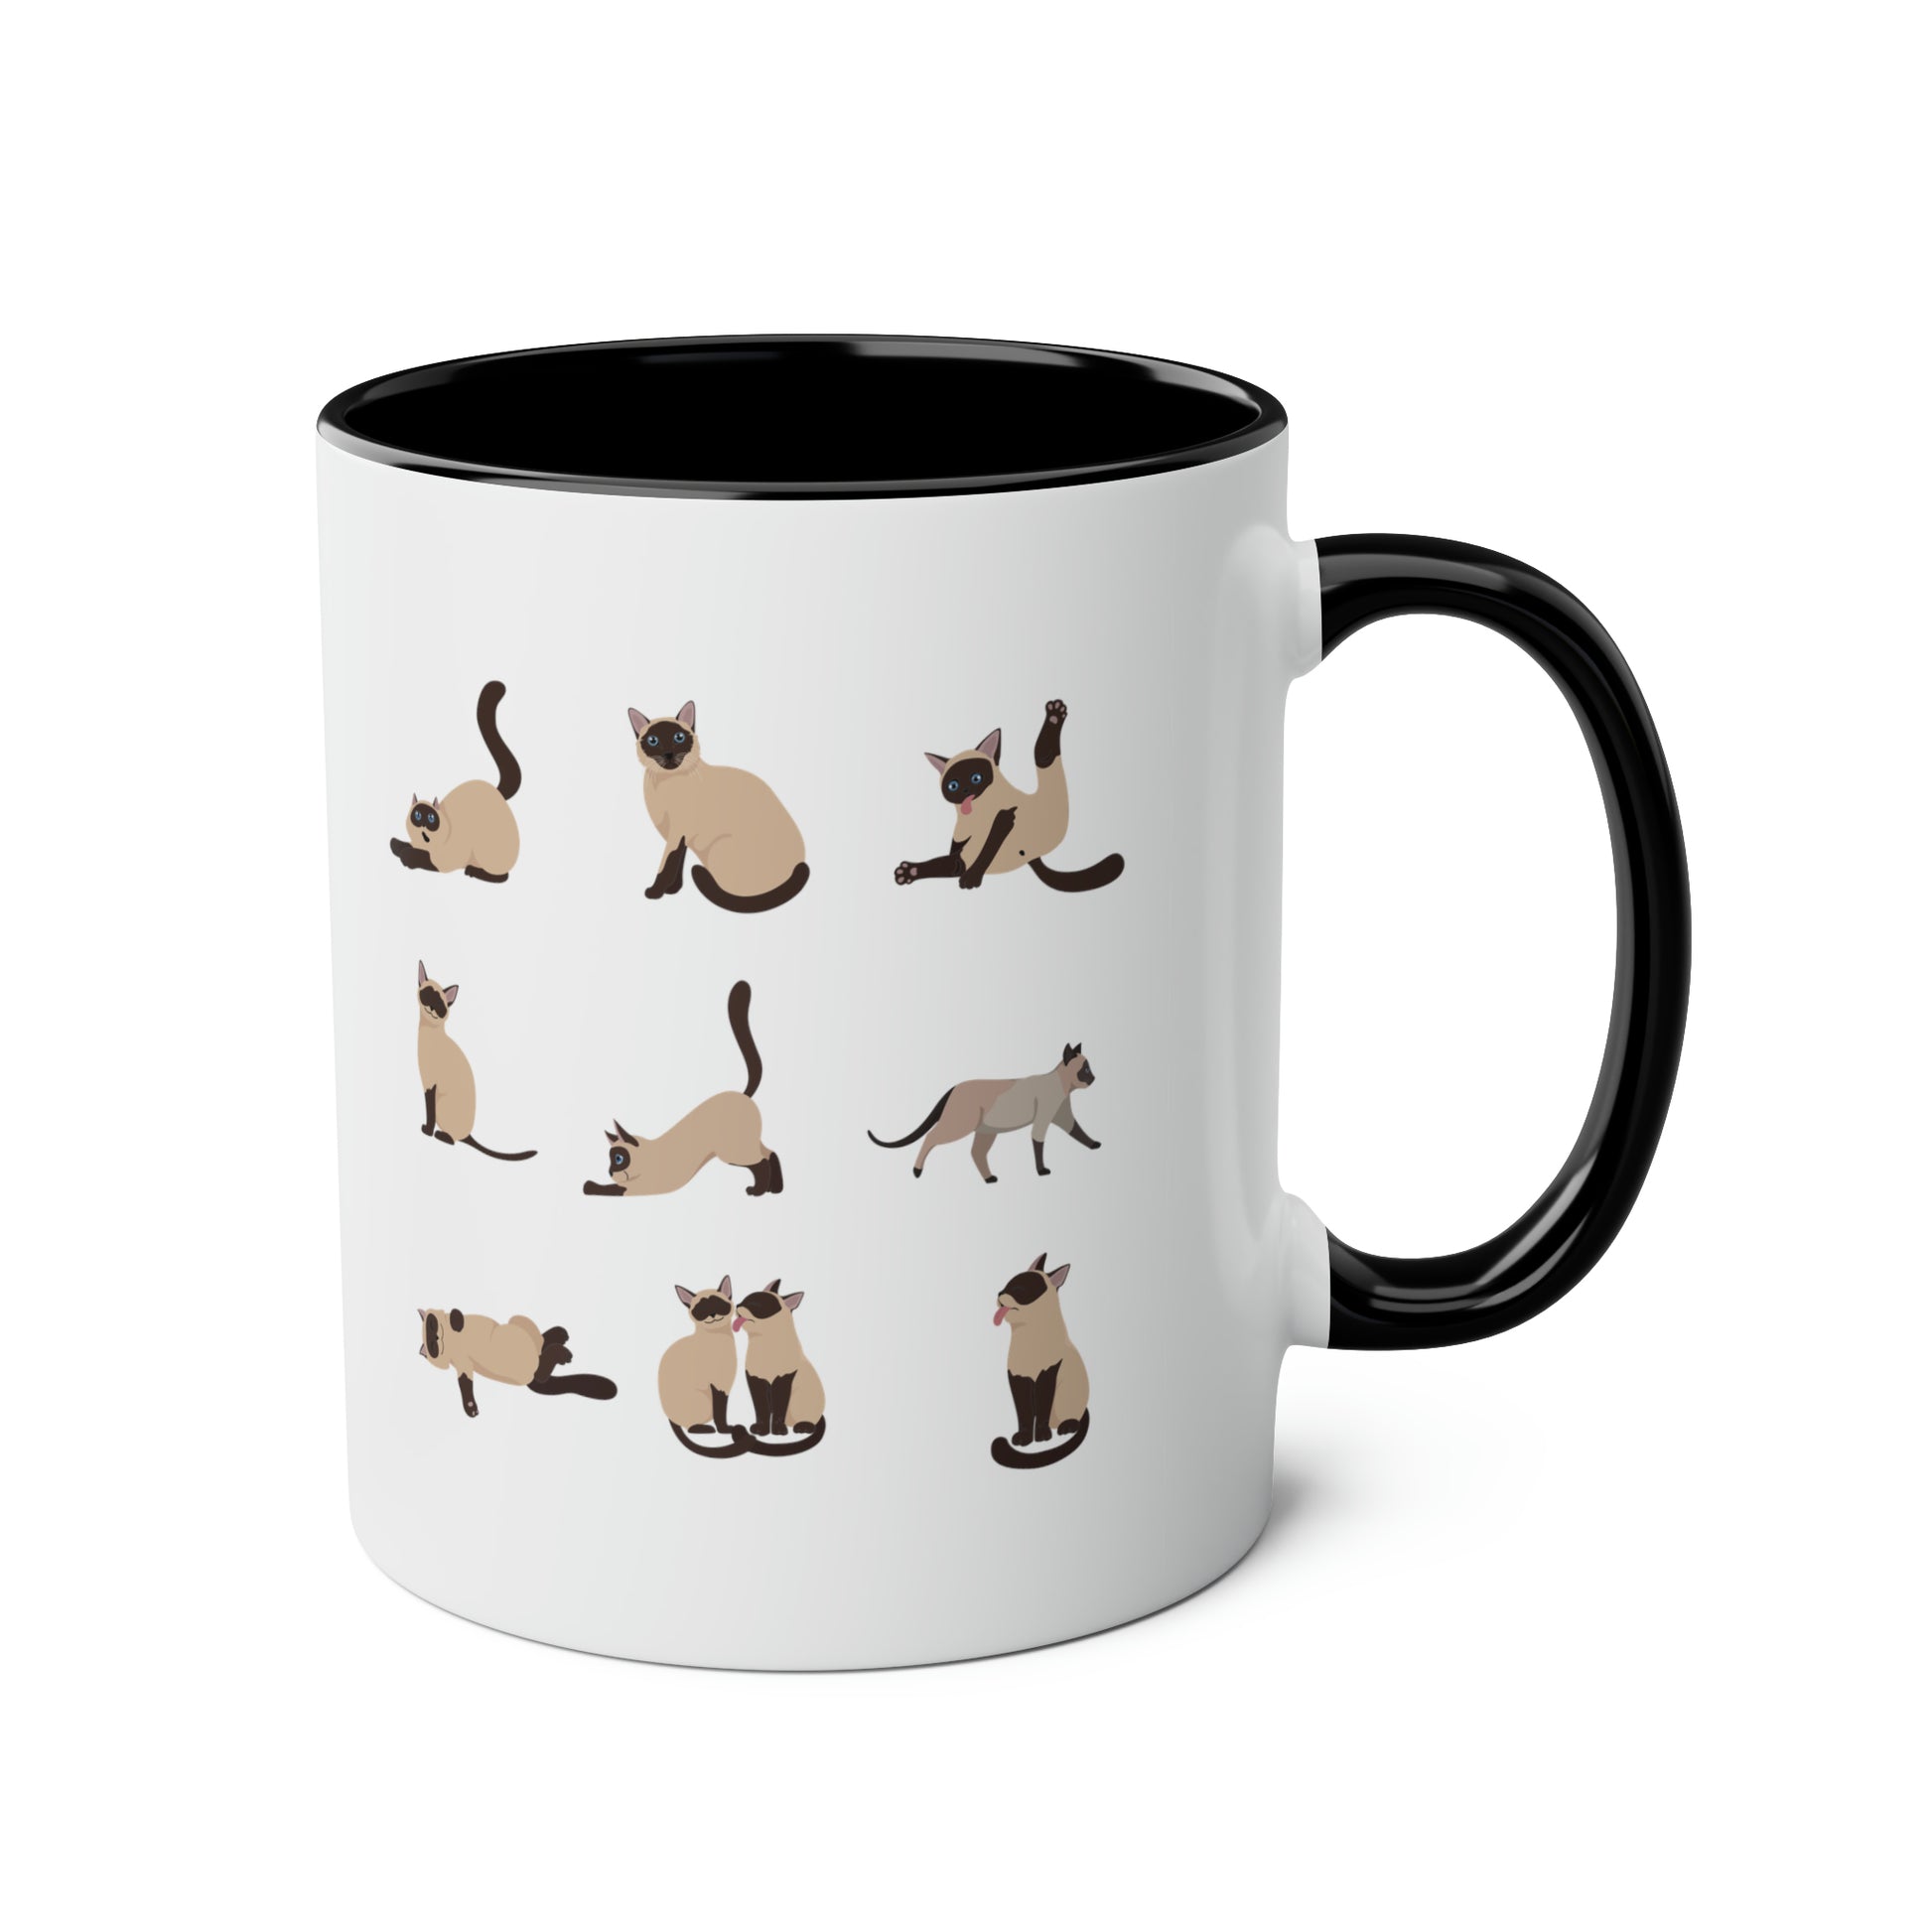 Siamese Cats 11oz white with black accent funny large coffee mug gift for cat mom cute kitten pet lover waveywares wavey wares wavywares wavy wares